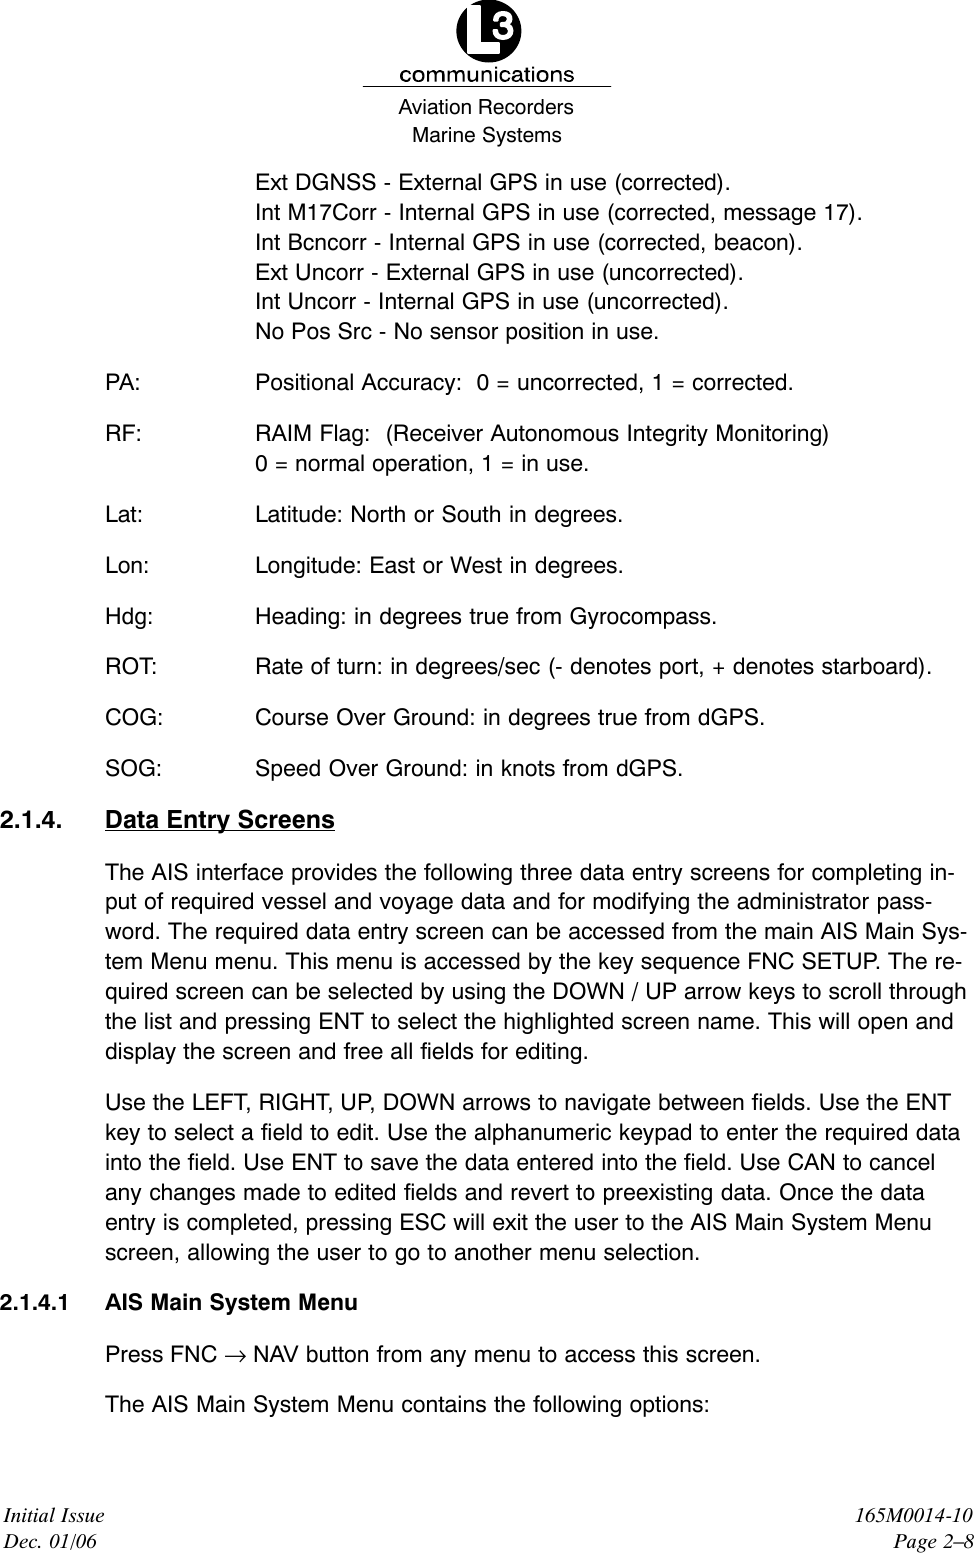 Marine SystemsAviation RecordersInitial IssueDec. 01/06165M0014-10Page 2–8Ext DGNSS - External GPS in use (corrected).Int M17Corr - Internal GPS in use (corrected, message 17).Int Bcncorr - Internal GPS in use (corrected, beacon).Ext Uncorr - External GPS in use (uncorrected).Int Uncorr - Internal GPS in use (uncorrected).No Pos Src - No sensor position in use.PA: Positional Accuracy:  0 = uncorrected, 1 = corrected.RF:  RAIM Flag:  (Receiver Autonomous Integrity Monitoring)0 = normal operation, 1 = in use.Lat: Latitude: North or South in degrees.Lon: Longitude: East or West in degrees.Hdg: Heading: in degrees true from Gyrocompass.ROT: Rate of turn: in degrees/sec (- denotes port, + denotes starboard).COG: Course Over Ground: in degrees true from dGPS.SOG: Speed Over Ground: in knots from dGPS.2.1.4. Data Entry ScreensThe AIS interface provides the following three data entry screens for completing in-put of required vessel and voyage data and for modifying the administrator pass-word. The required data entry screen can be accessed from the main AIS Main Sys-tem Menu menu. This menu is accessed by the key sequence FNC SETUP. The re-quired screen can be selected by using the DOWN / UP arrow keys to scroll throughthe list and pressing ENT to select the highlighted screen name. This will open anddisplay the screen and free all fields for editing.Use the LEFT, RIGHT, UP, DOWN arrows to navigate between fields. Use the ENTkey to select a field to edit. Use the alphanumeric keypad to enter the required datainto the field. Use ENT to save the data entered into the field. Use CAN to cancelany changes made to edited fields and revert to preexisting data. Once the dataentry is completed, pressing ESC will exit the user to the AIS Main System Menuscreen, allowing the user to go to another menu selection.2.1.4.1 AIS Main System MenuPress FNC → NAV button from any menu to access this screen.The AIS Main System Menu contains the following options: